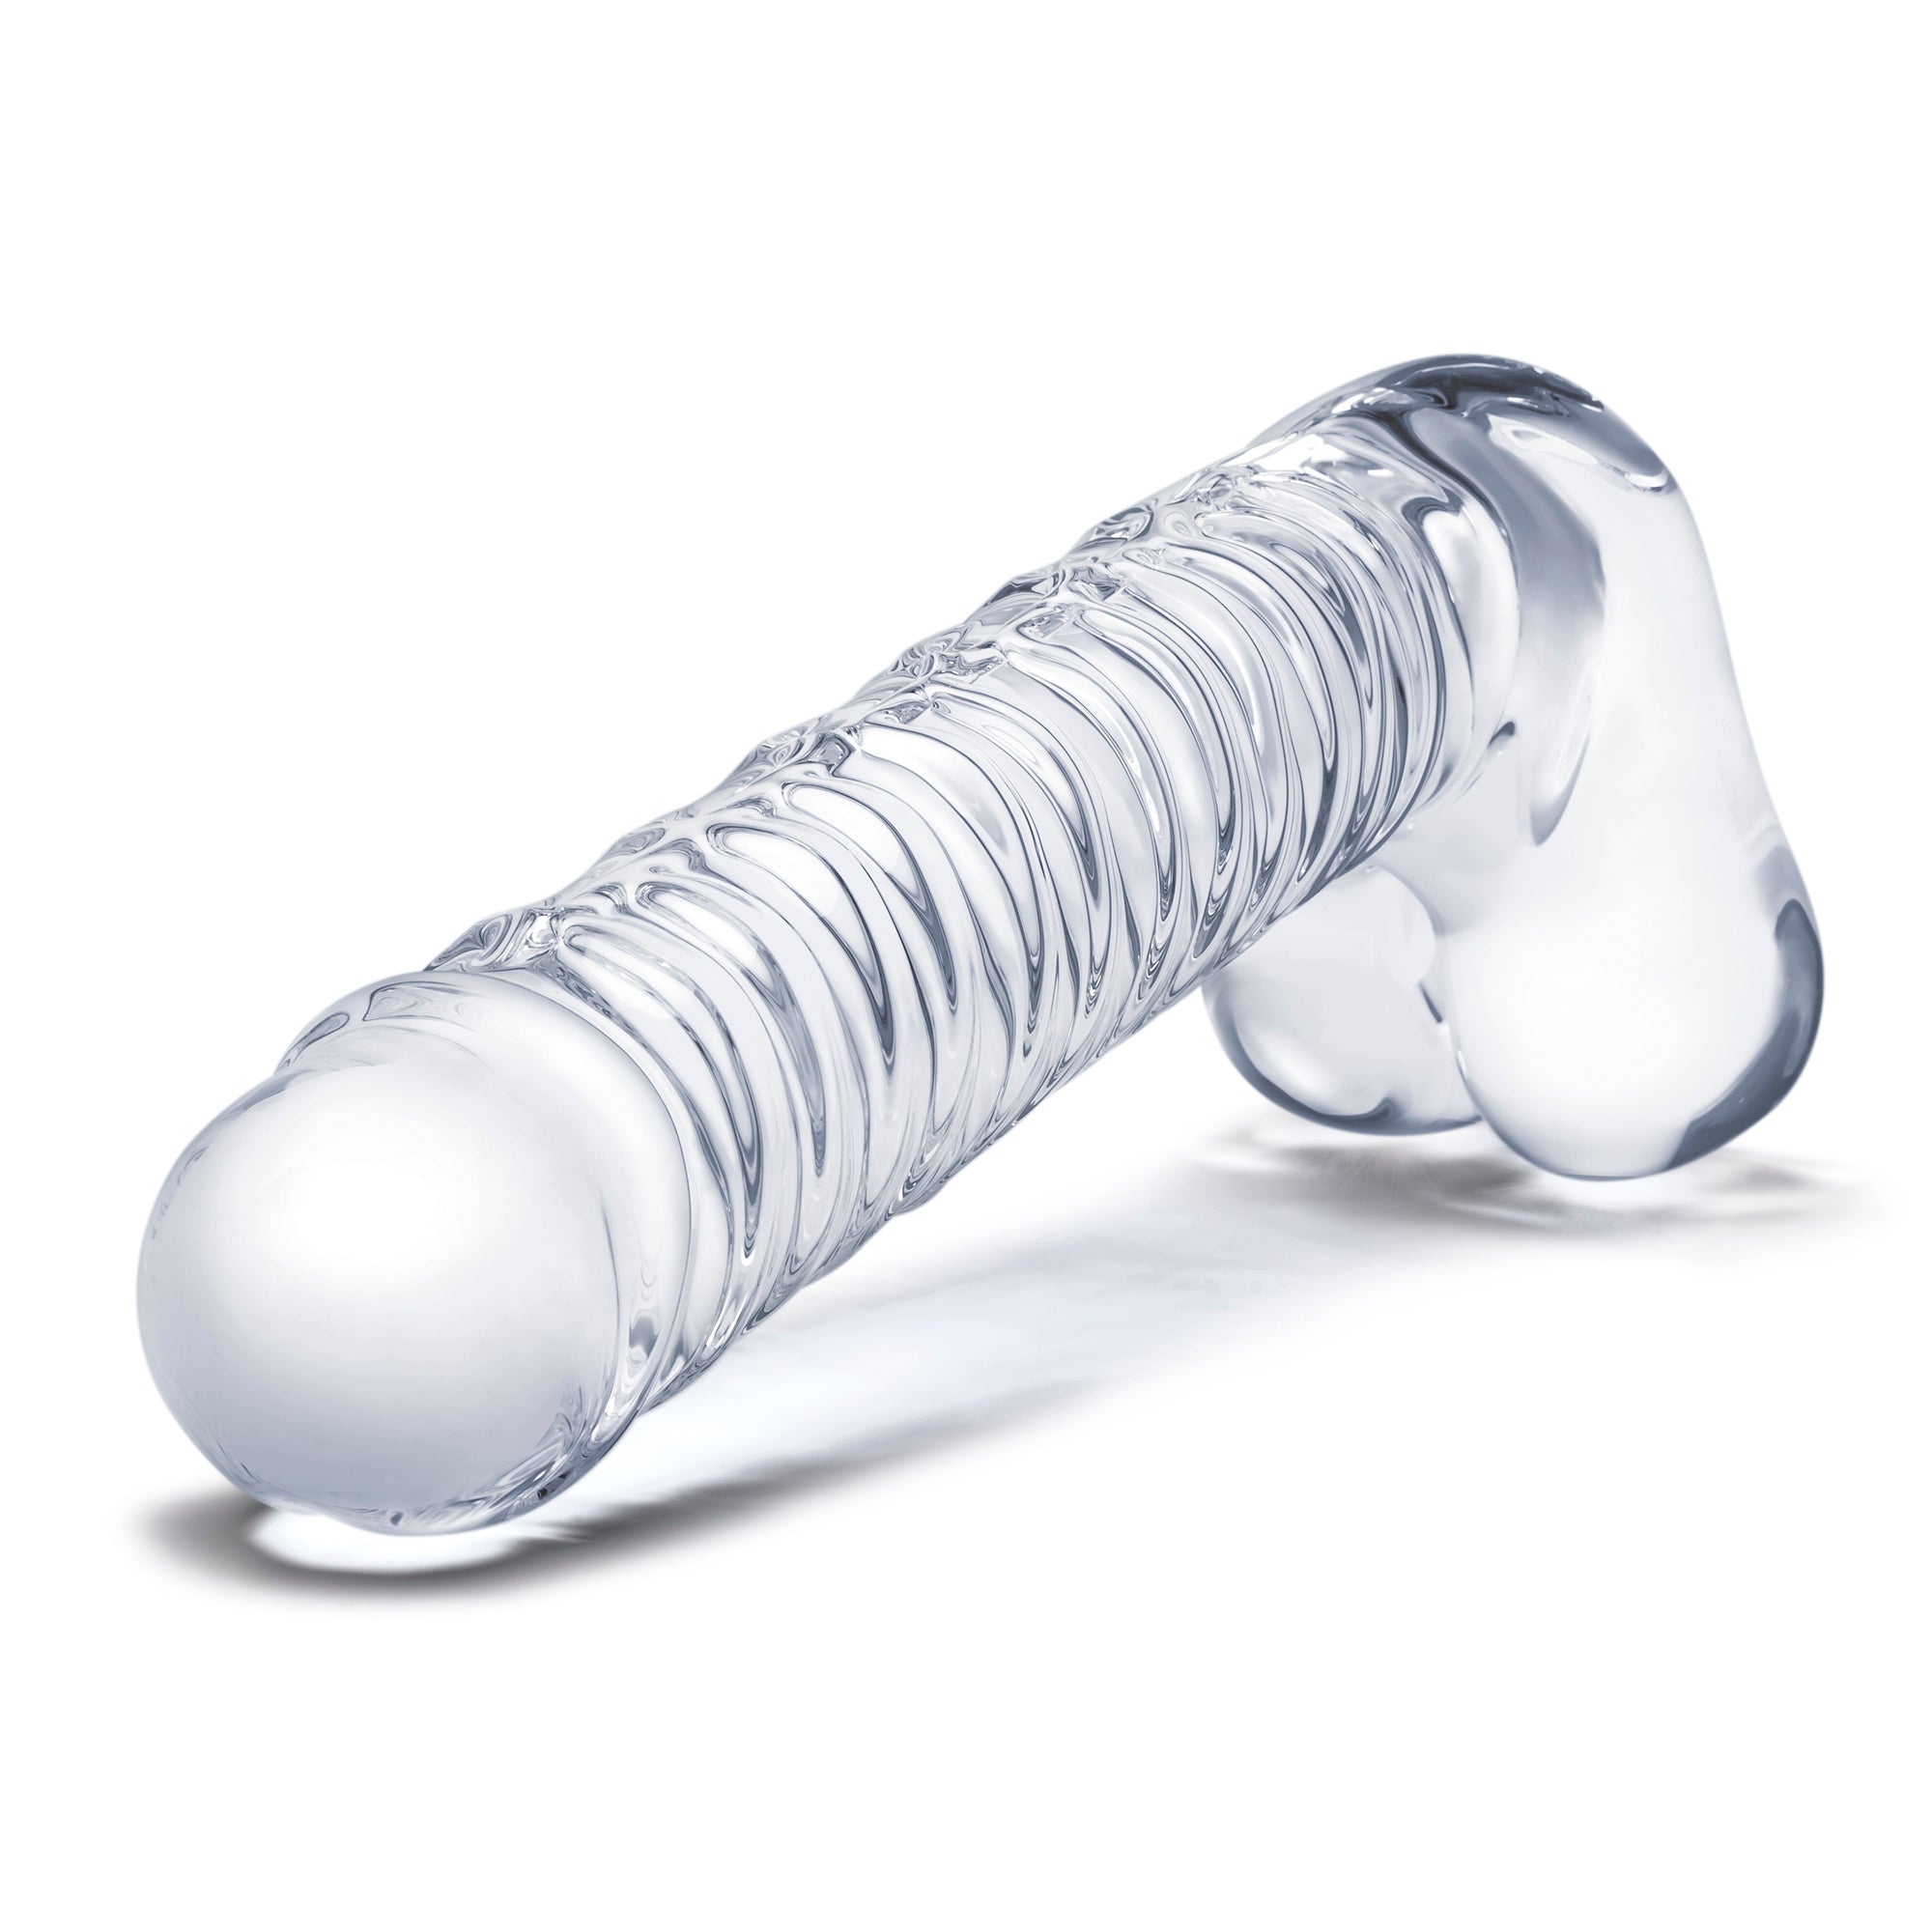 8" Realistic Ribbed Glass  G-Spot Dildo with Balls